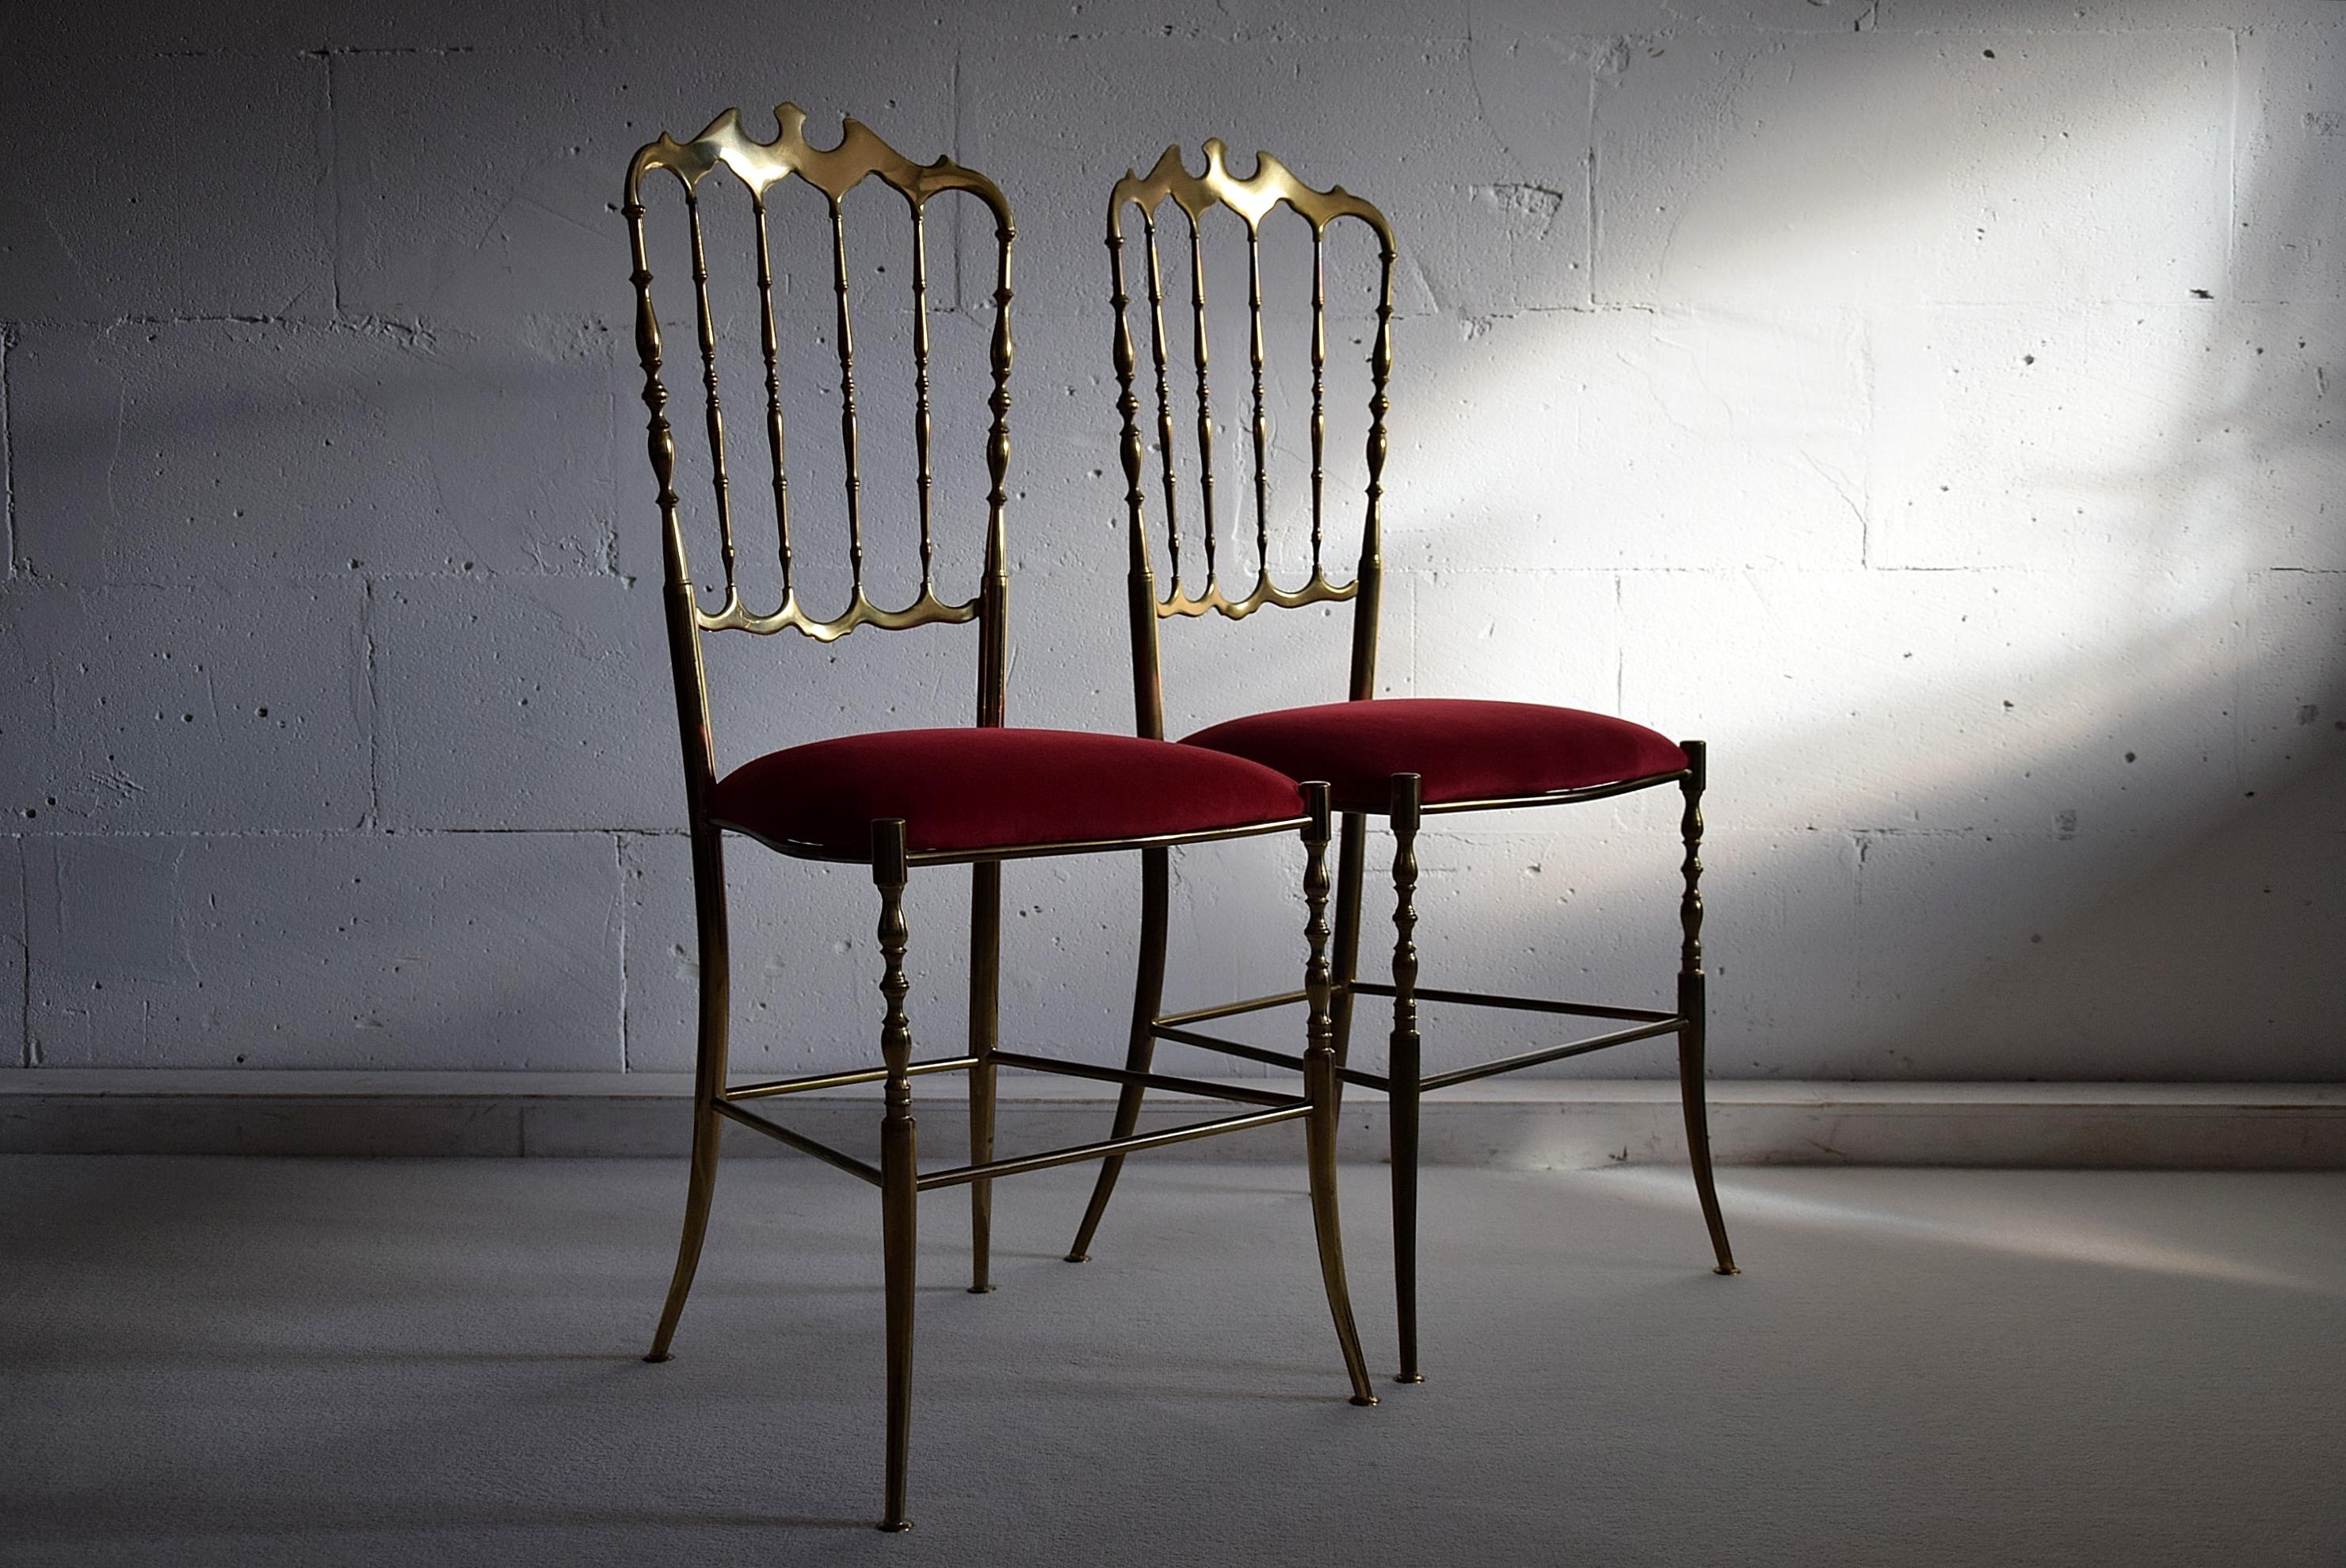 Midcentury brass and red velvet Chiavari chairs produced in Chiavari Italy in the 1950s.
Both chairs are in great vintage condition and have been re-upholstered in a gorgeous red velvet.

The chairs will be shipped overseas in a custom made